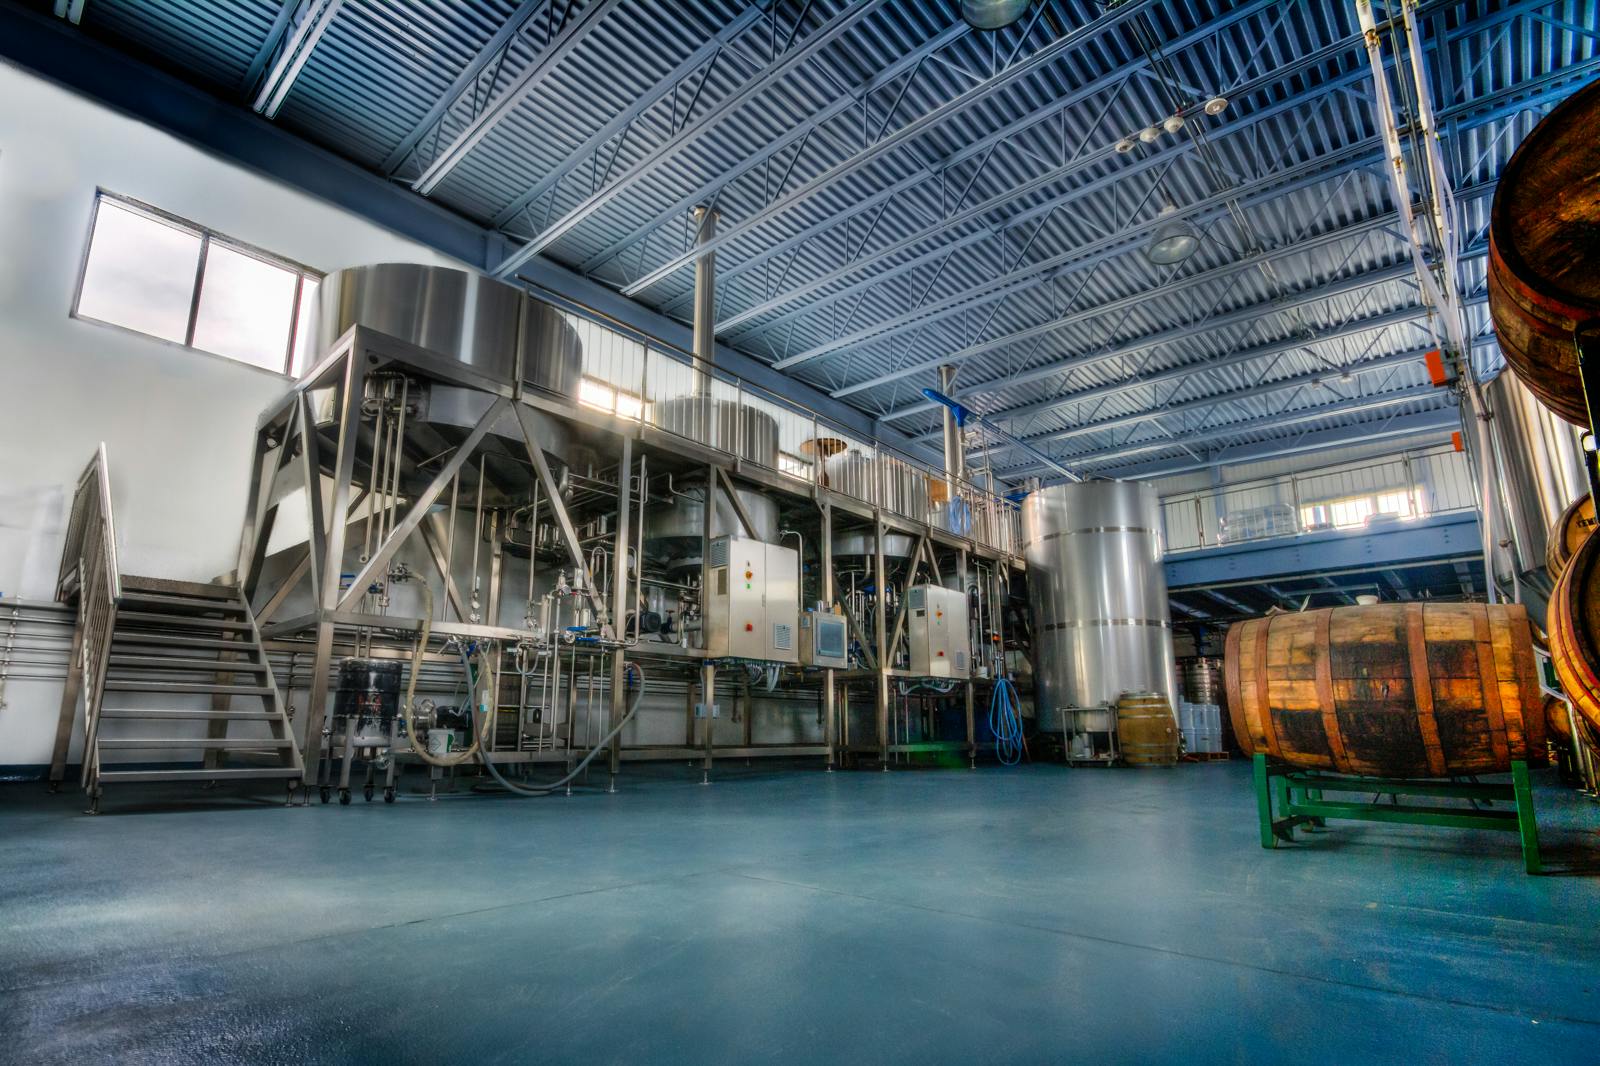 Inside the brewhouse